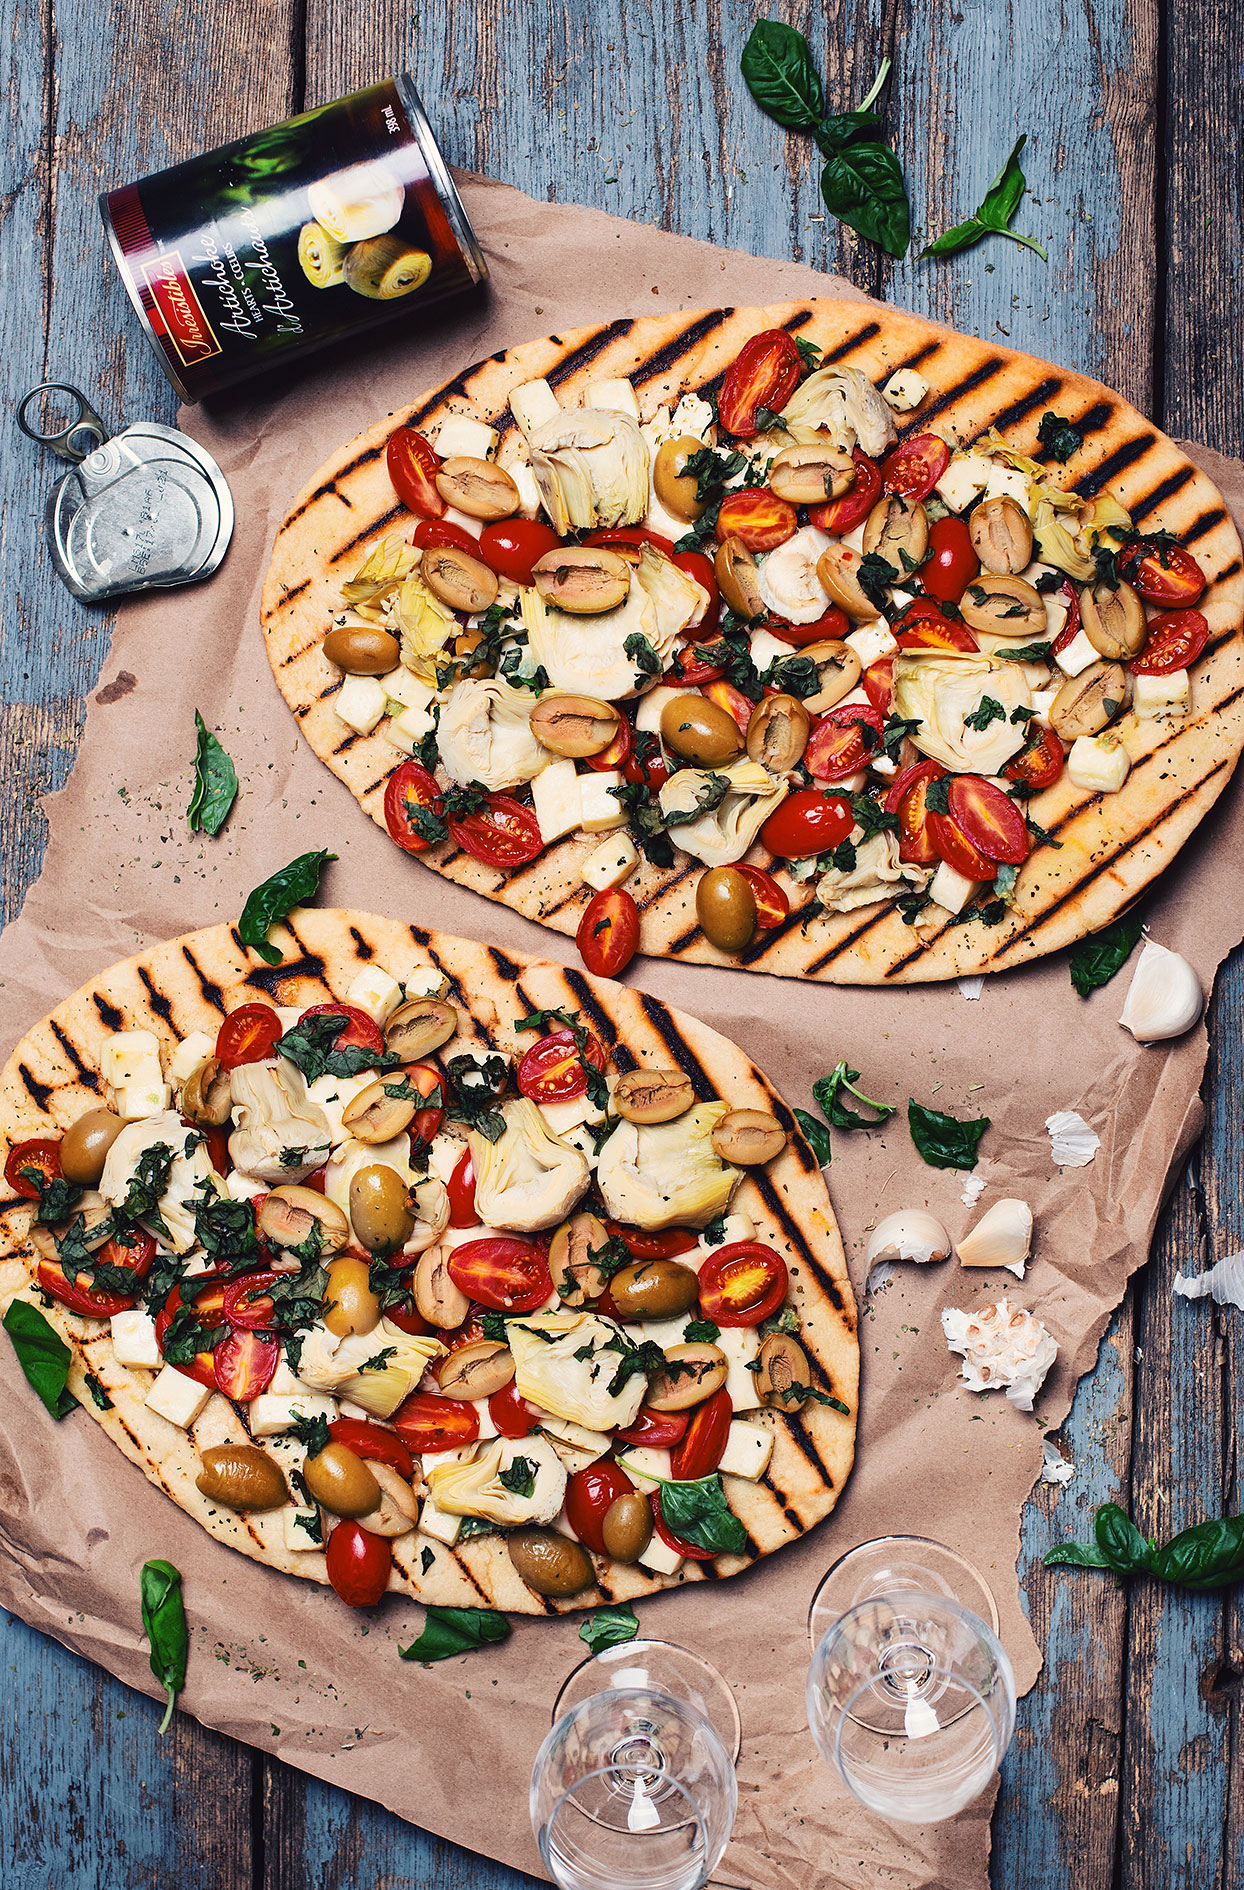 BBQ pizza with artichoke hearts, olives and Haloumi cheese